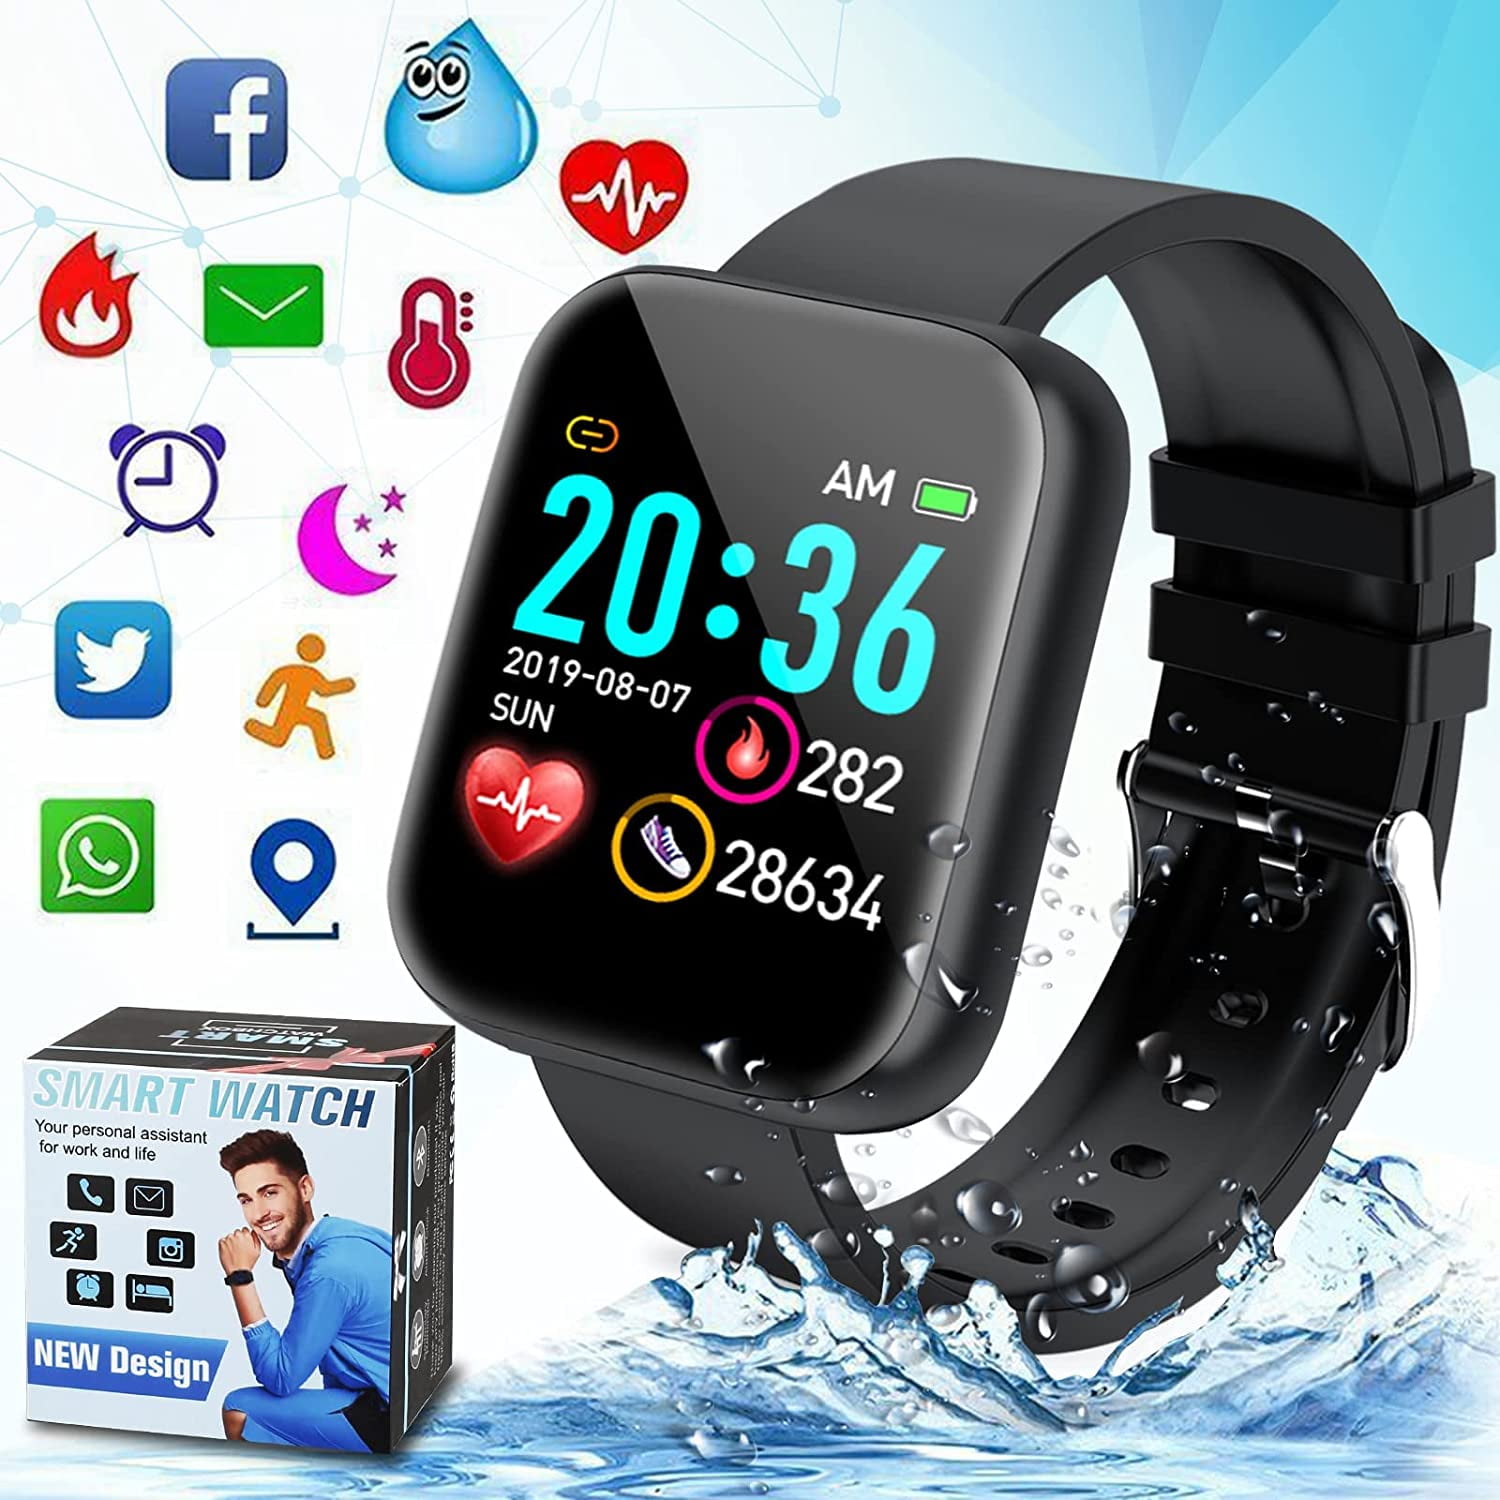 Bluetooth Fitness Tracker,Smart Bracelet,Activity Tracker with Heart Rate and Blood Pressure Monitor,IP67 Waterproof,Calling SMS SNS Remind Gold Bluetooth Pedometer for Android/iOS Phone 